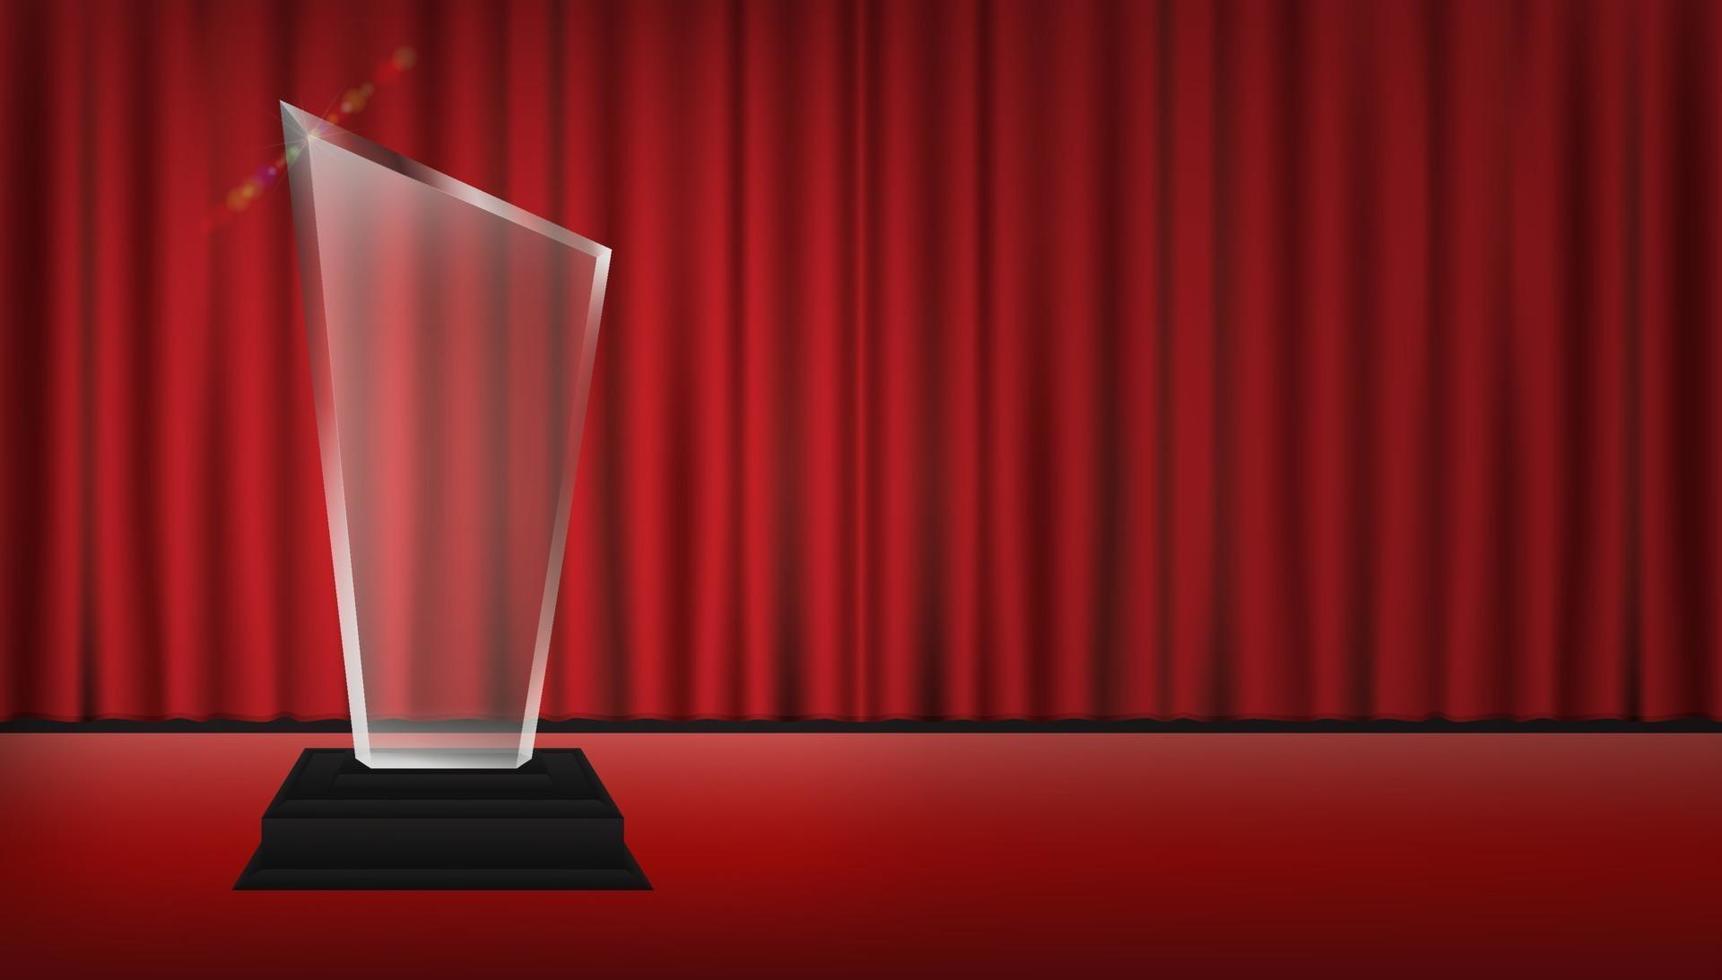 acrylic trophy with red curtain stage background vector